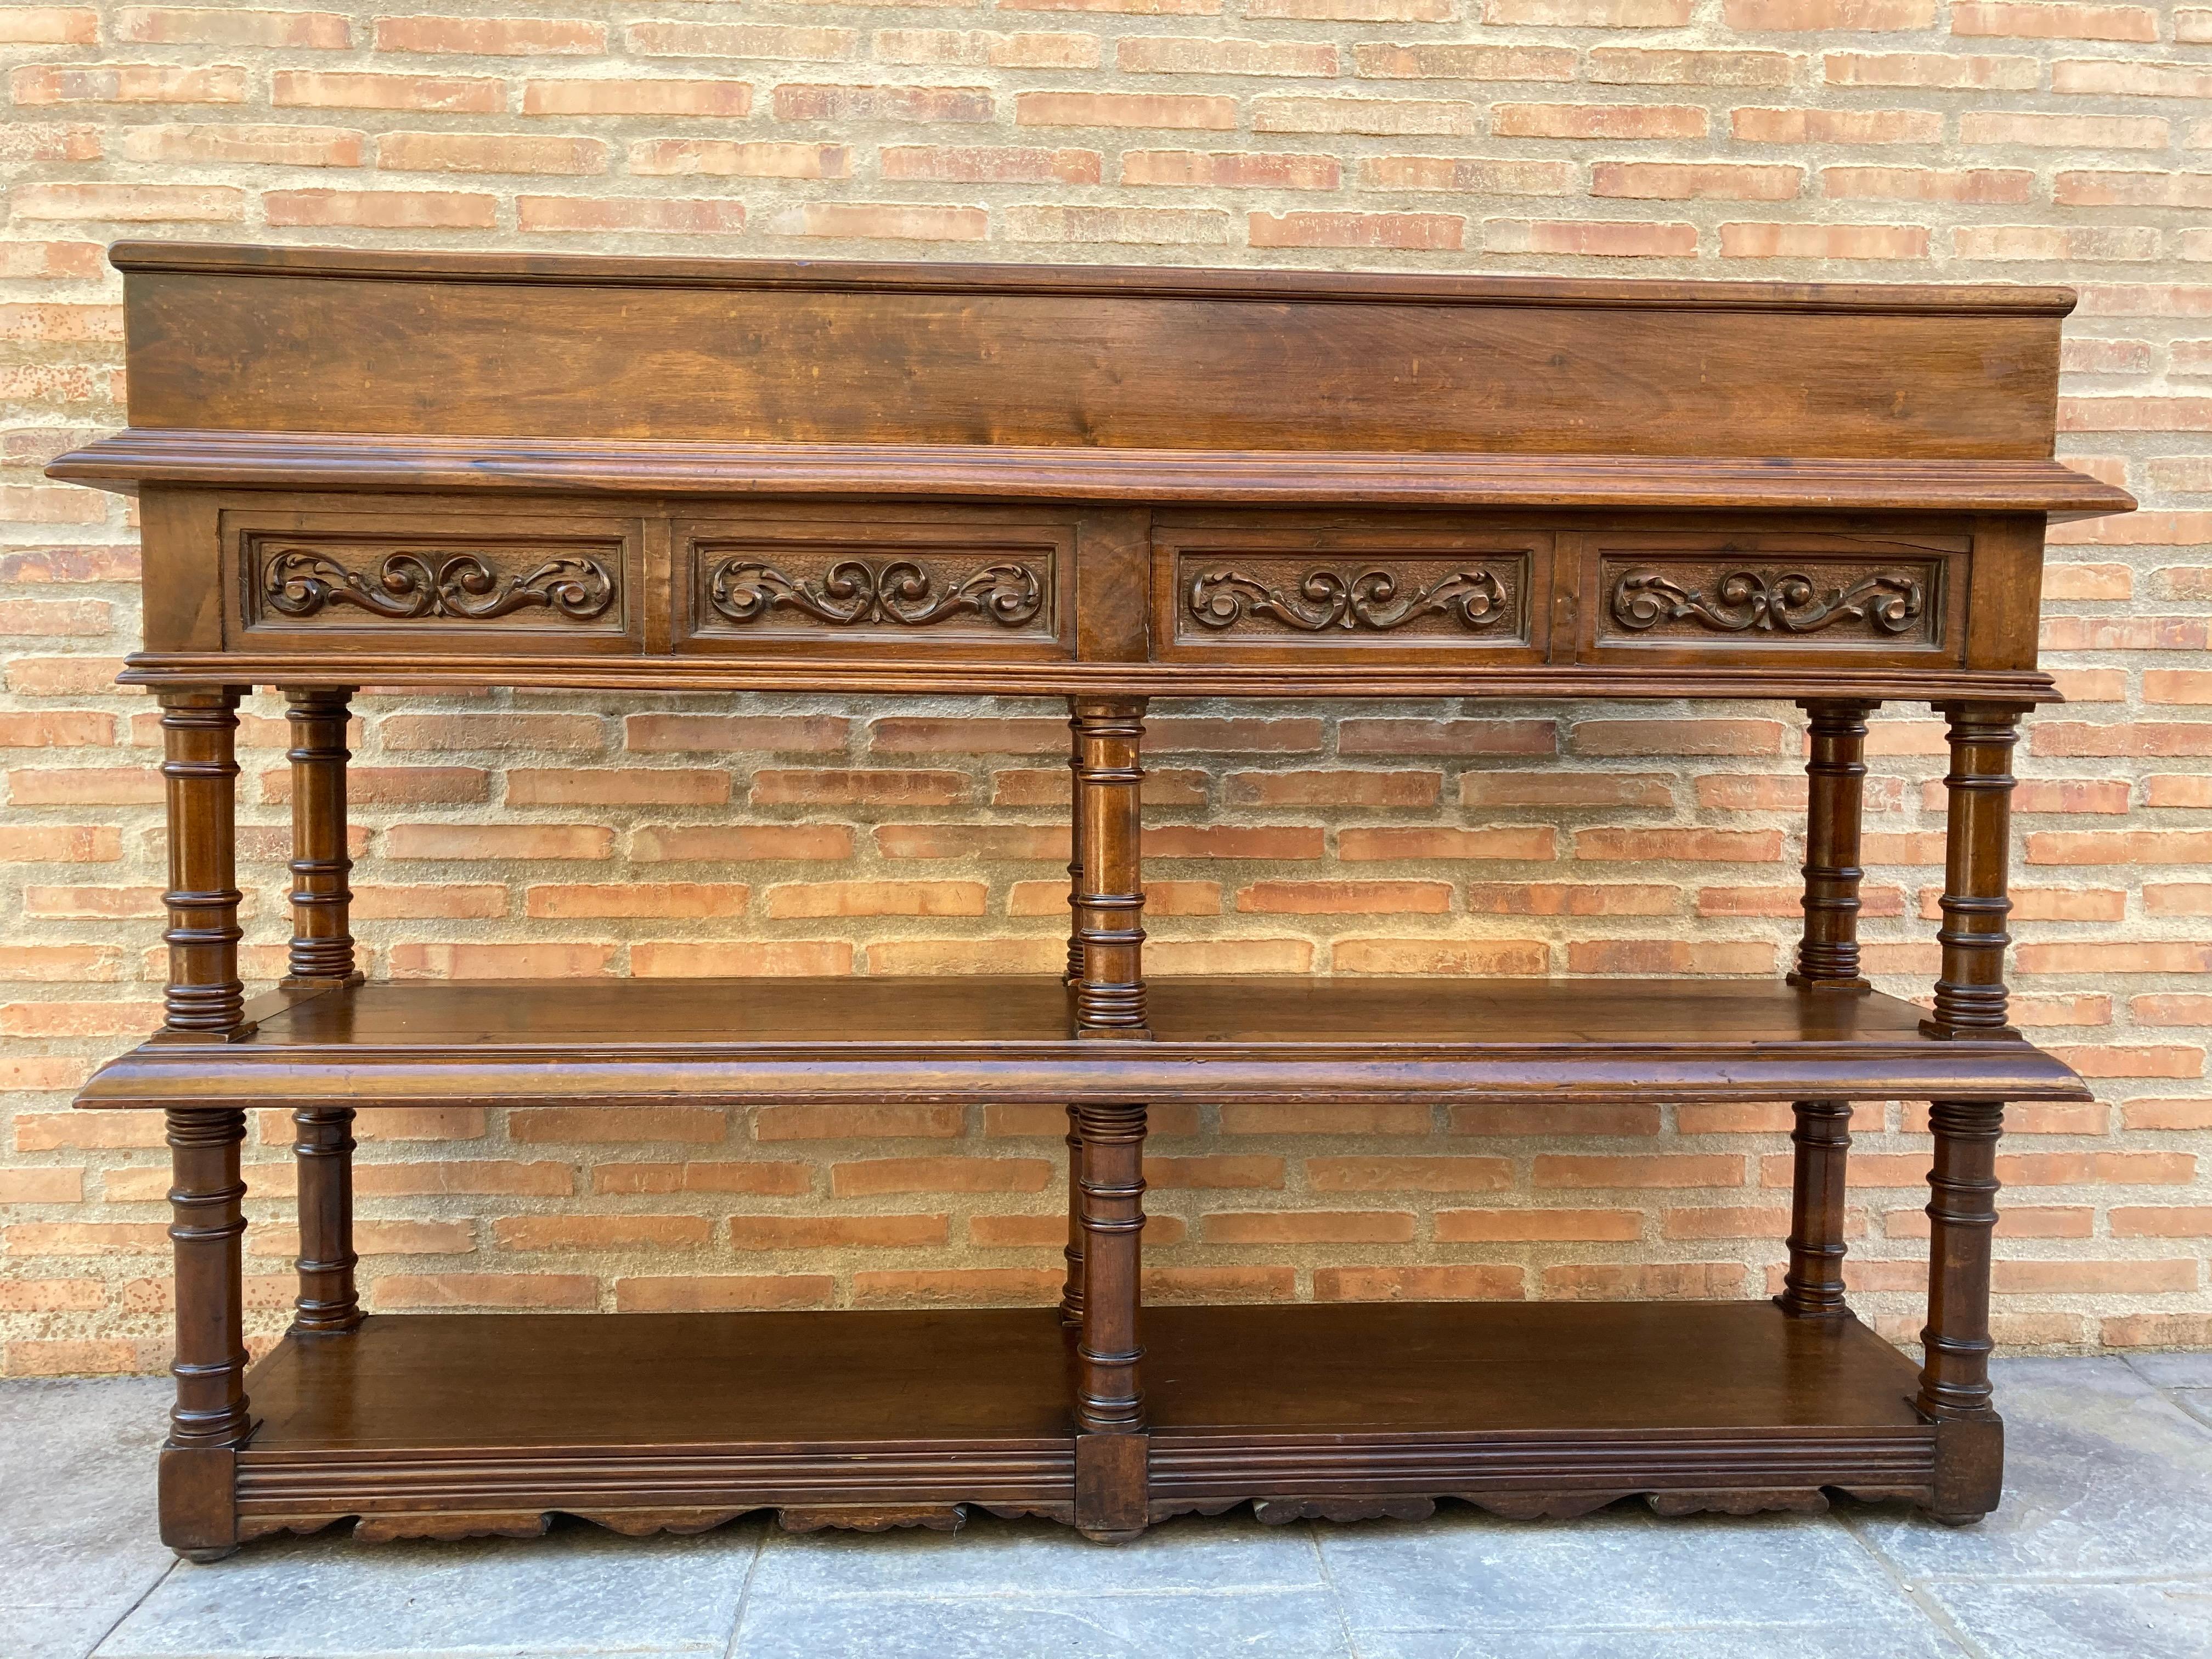 Antique French Renaissance server sideboard carved from oak

Magnificent French Renaissance style server sideboard carved from oak. 
Outstanding carvings on all sides, both on the front of the four drawers with their iron handles, and on the